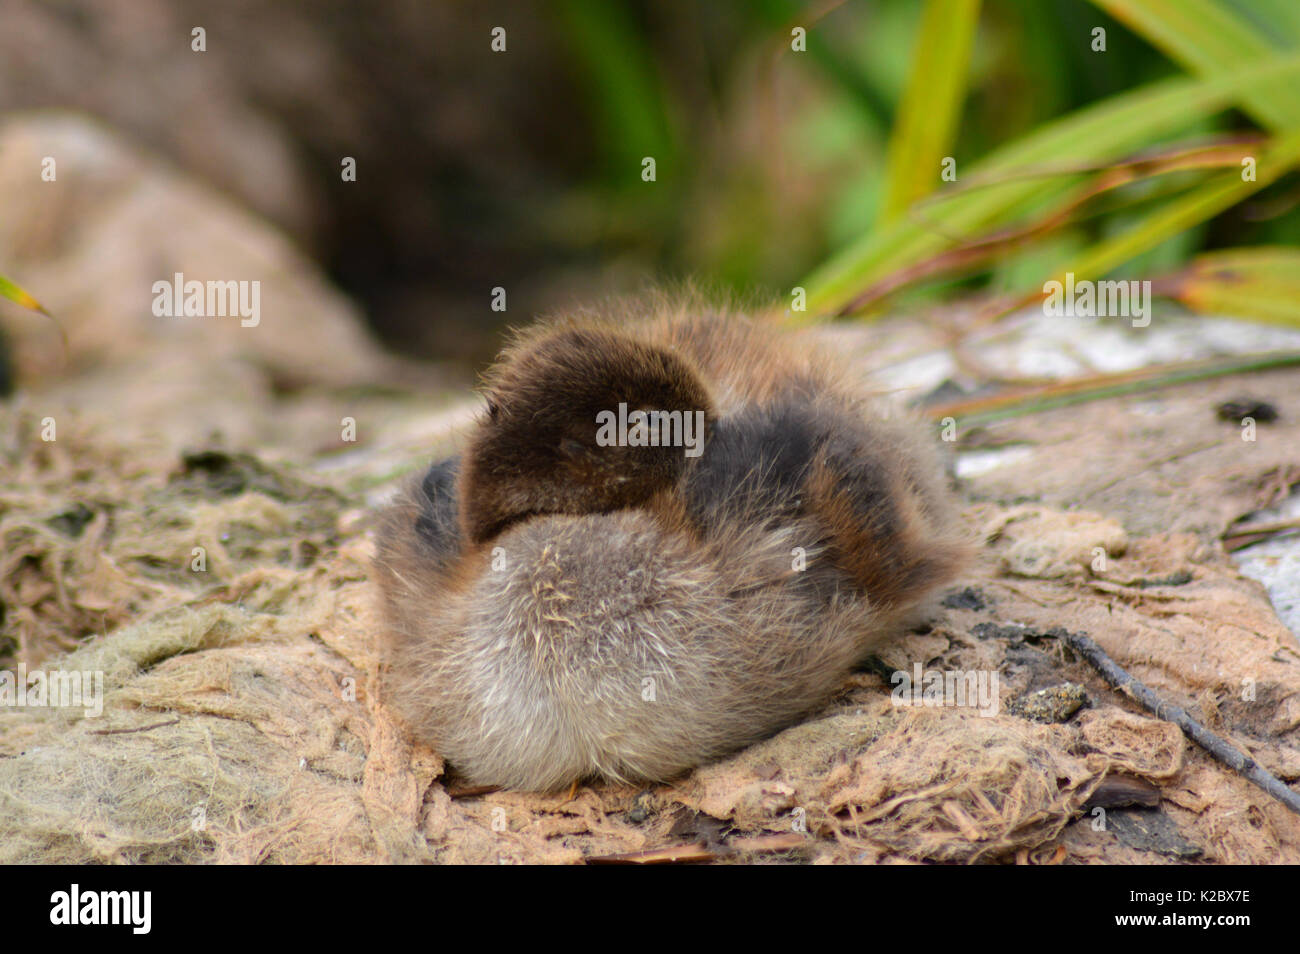 Cute duckling peeping out from under a wing Stock Photo